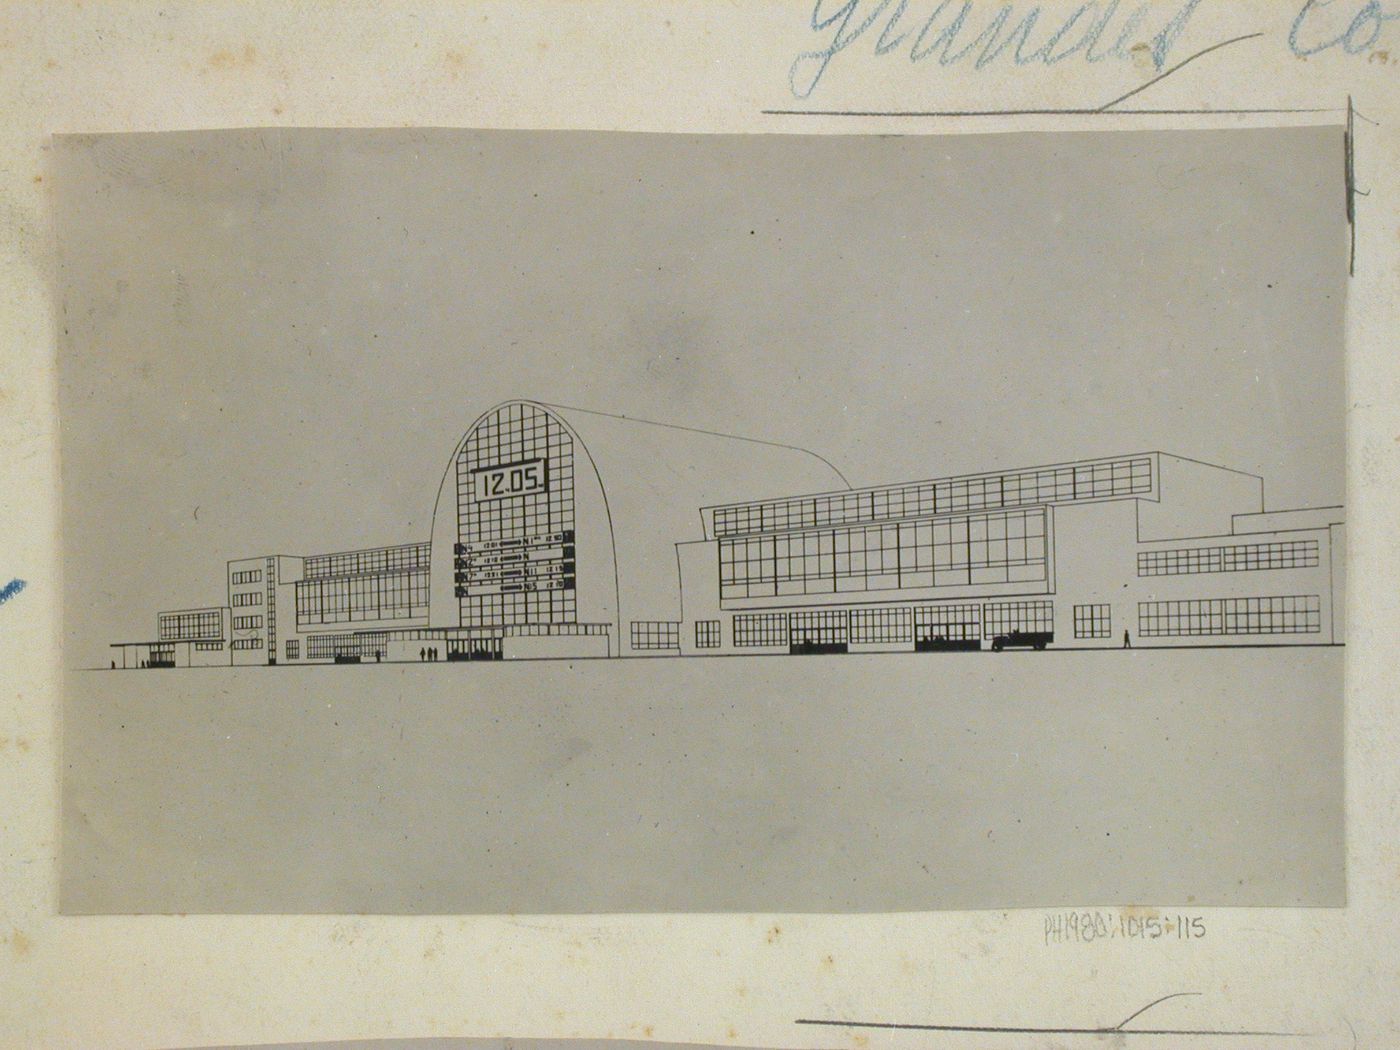 View of an elevation drawing for a train station, U.S.S.R. (now Russia)